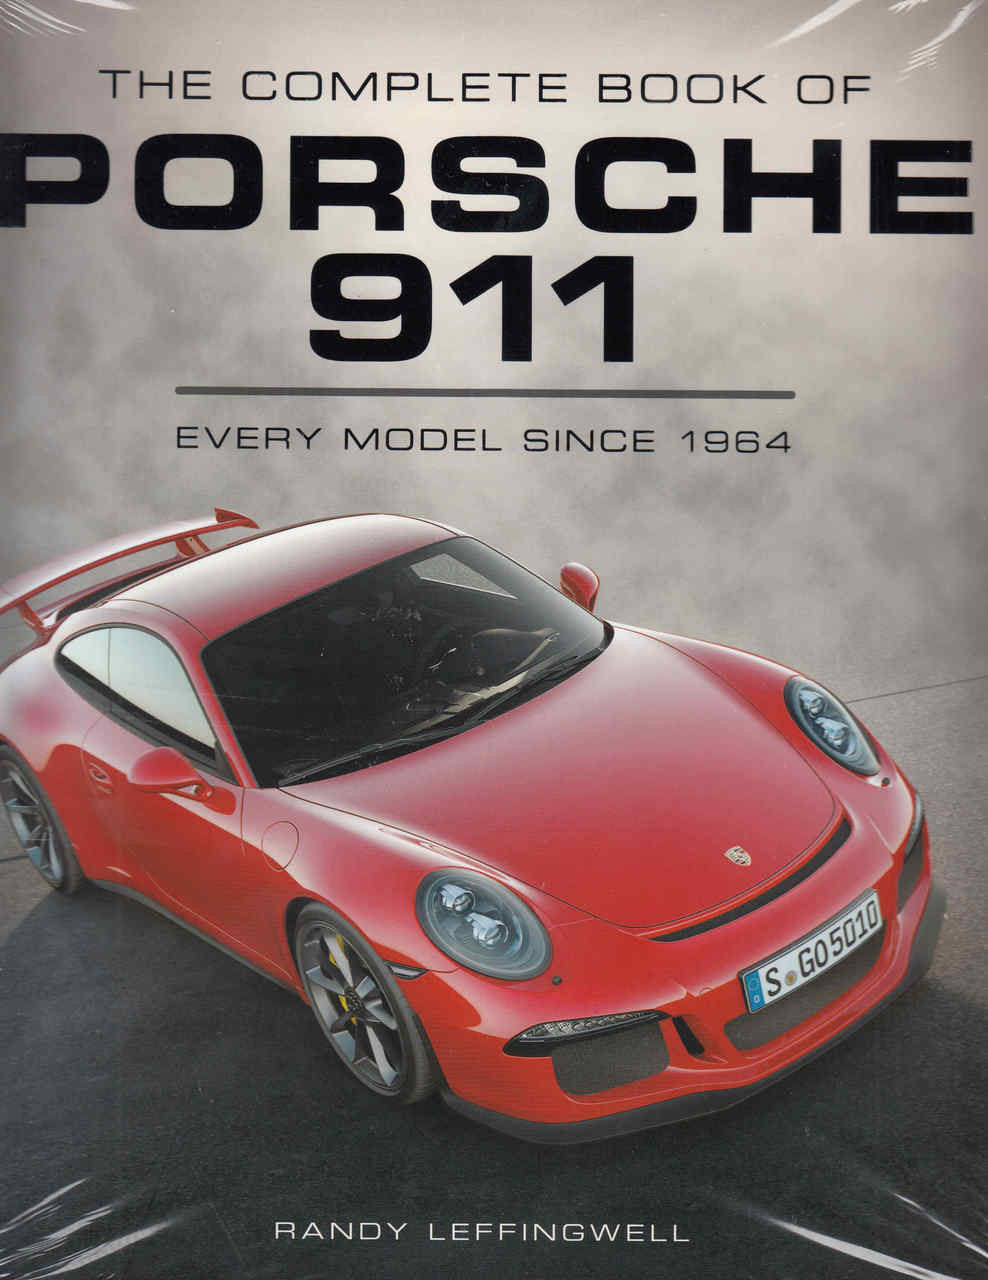 The Complete Book Of The Porsche 911: Every Model Since 1964